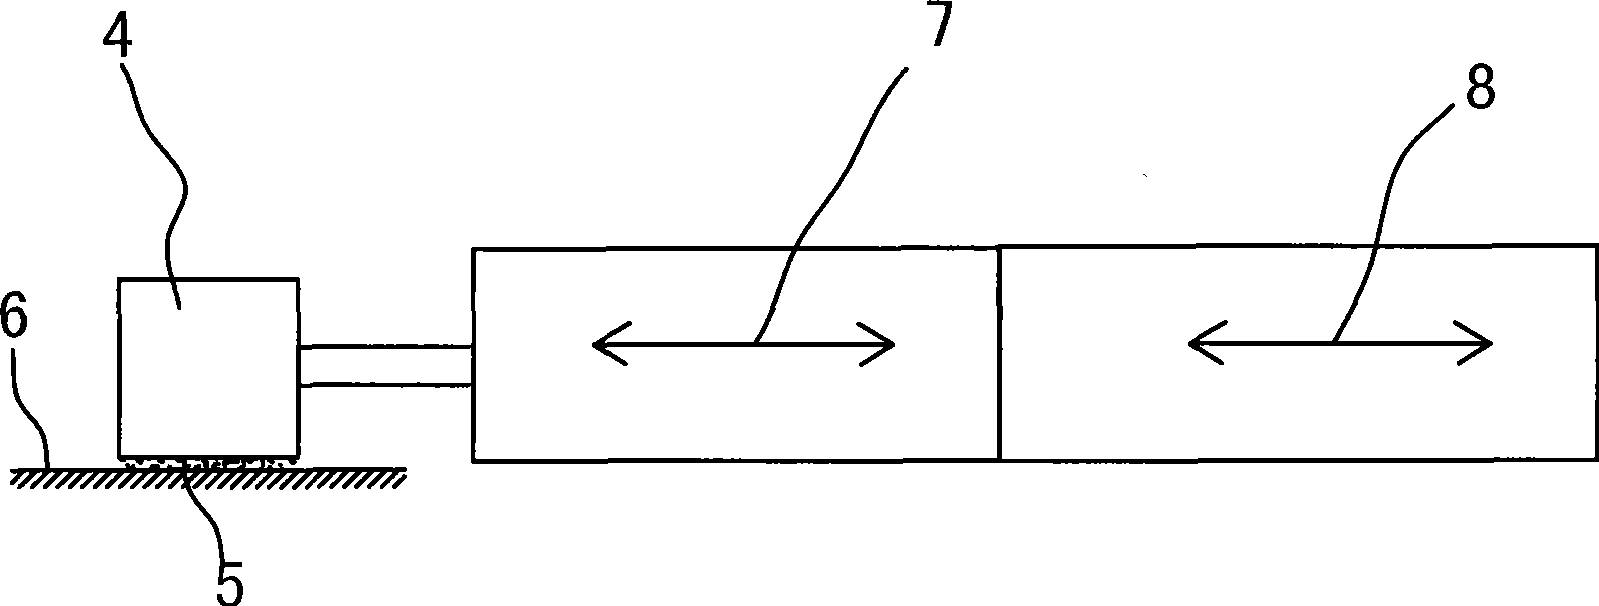 Grinding method combining mechanical reciprocation and supersonic vibration